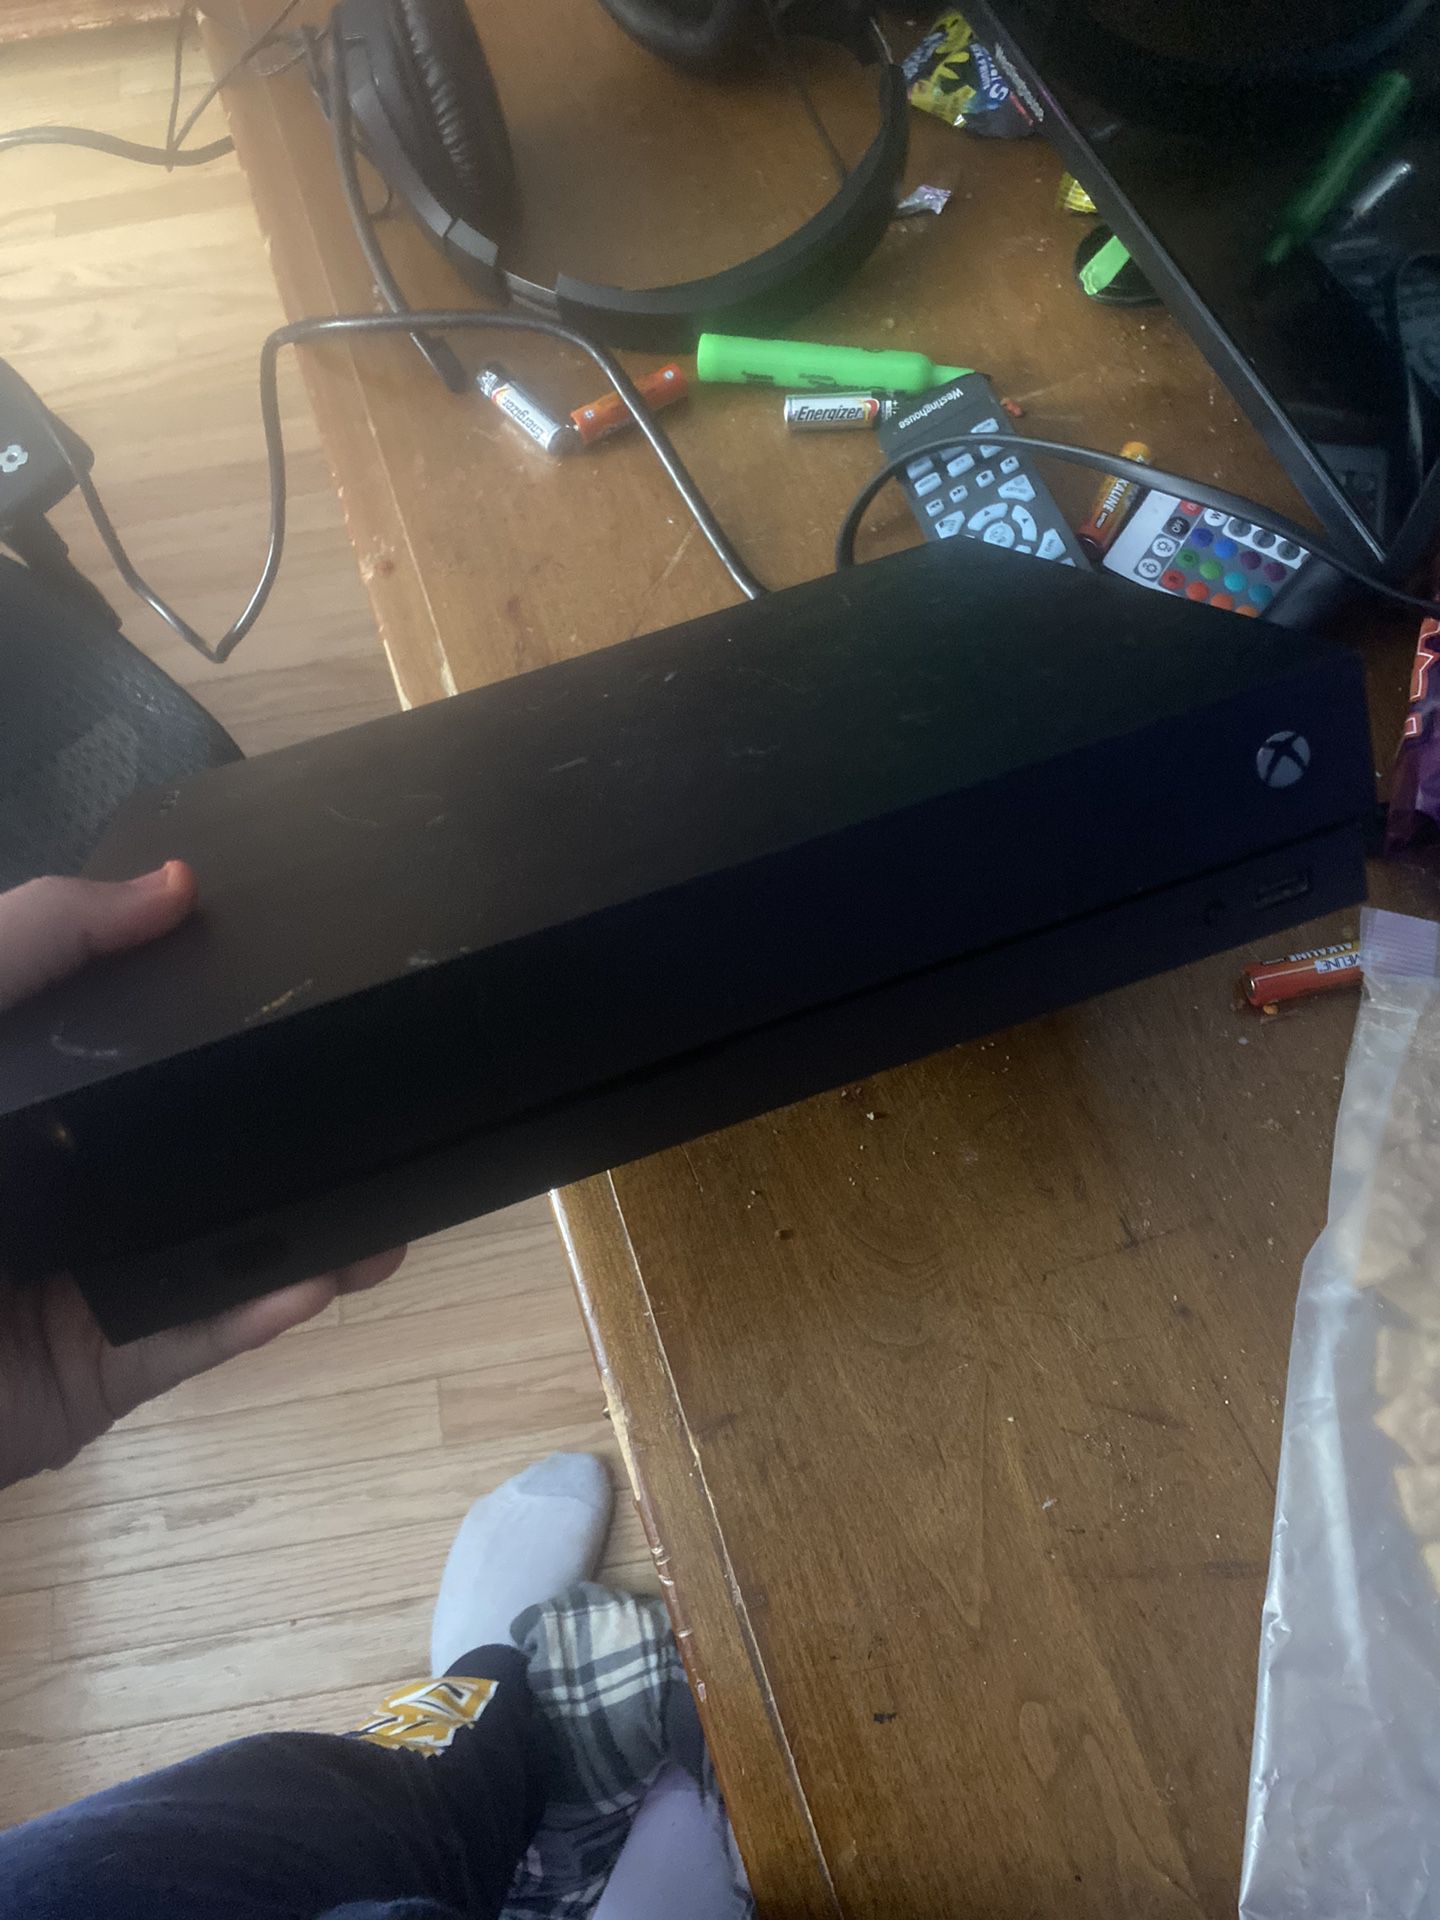 Selling An Xbox And A Ps4 Together Just Don’t Wanna Play The Game Anymore